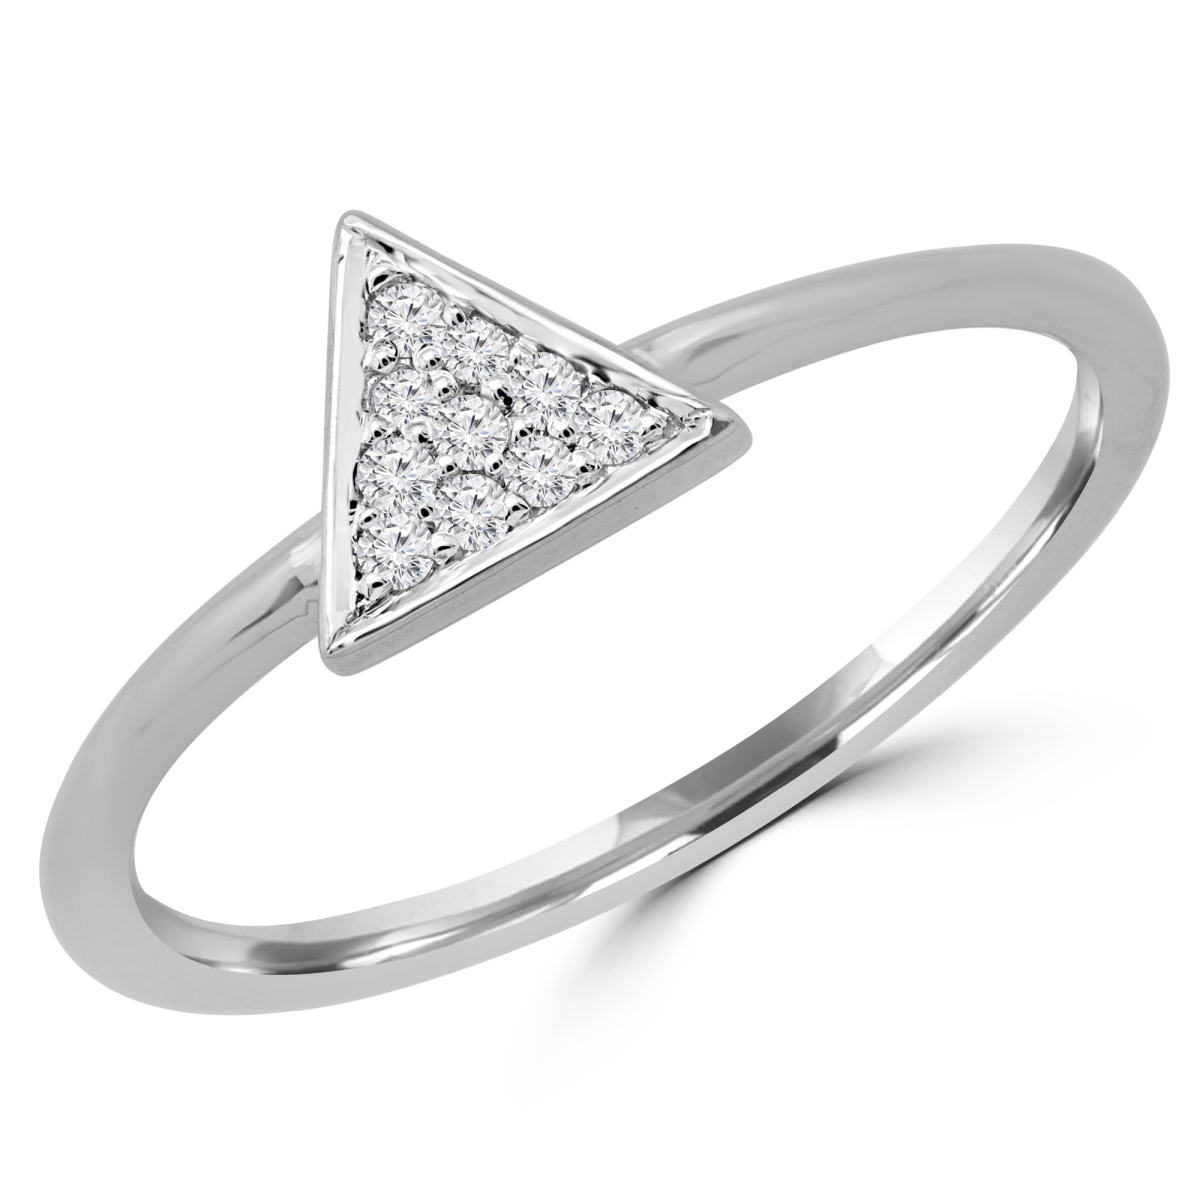 Picture of Majesty Diamonds MDR190069-3.5 0.1 CTW Round Diamond Triangle Cluster Ring in 14K White Gold - Size 3.5